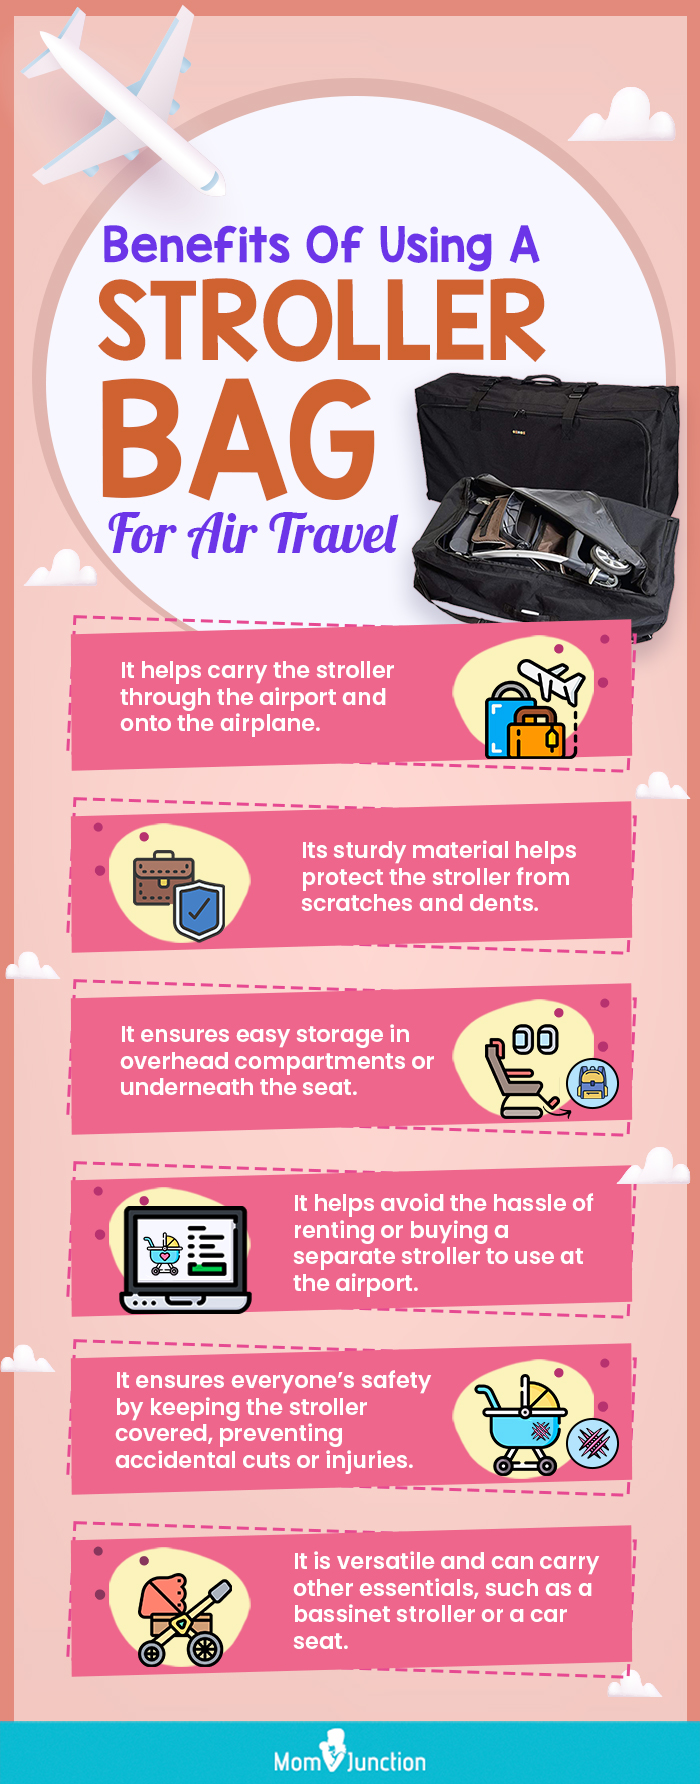 Benefits-Of-Using-A-Stroller-Bag-For-Air-Travel-2 (infographic)